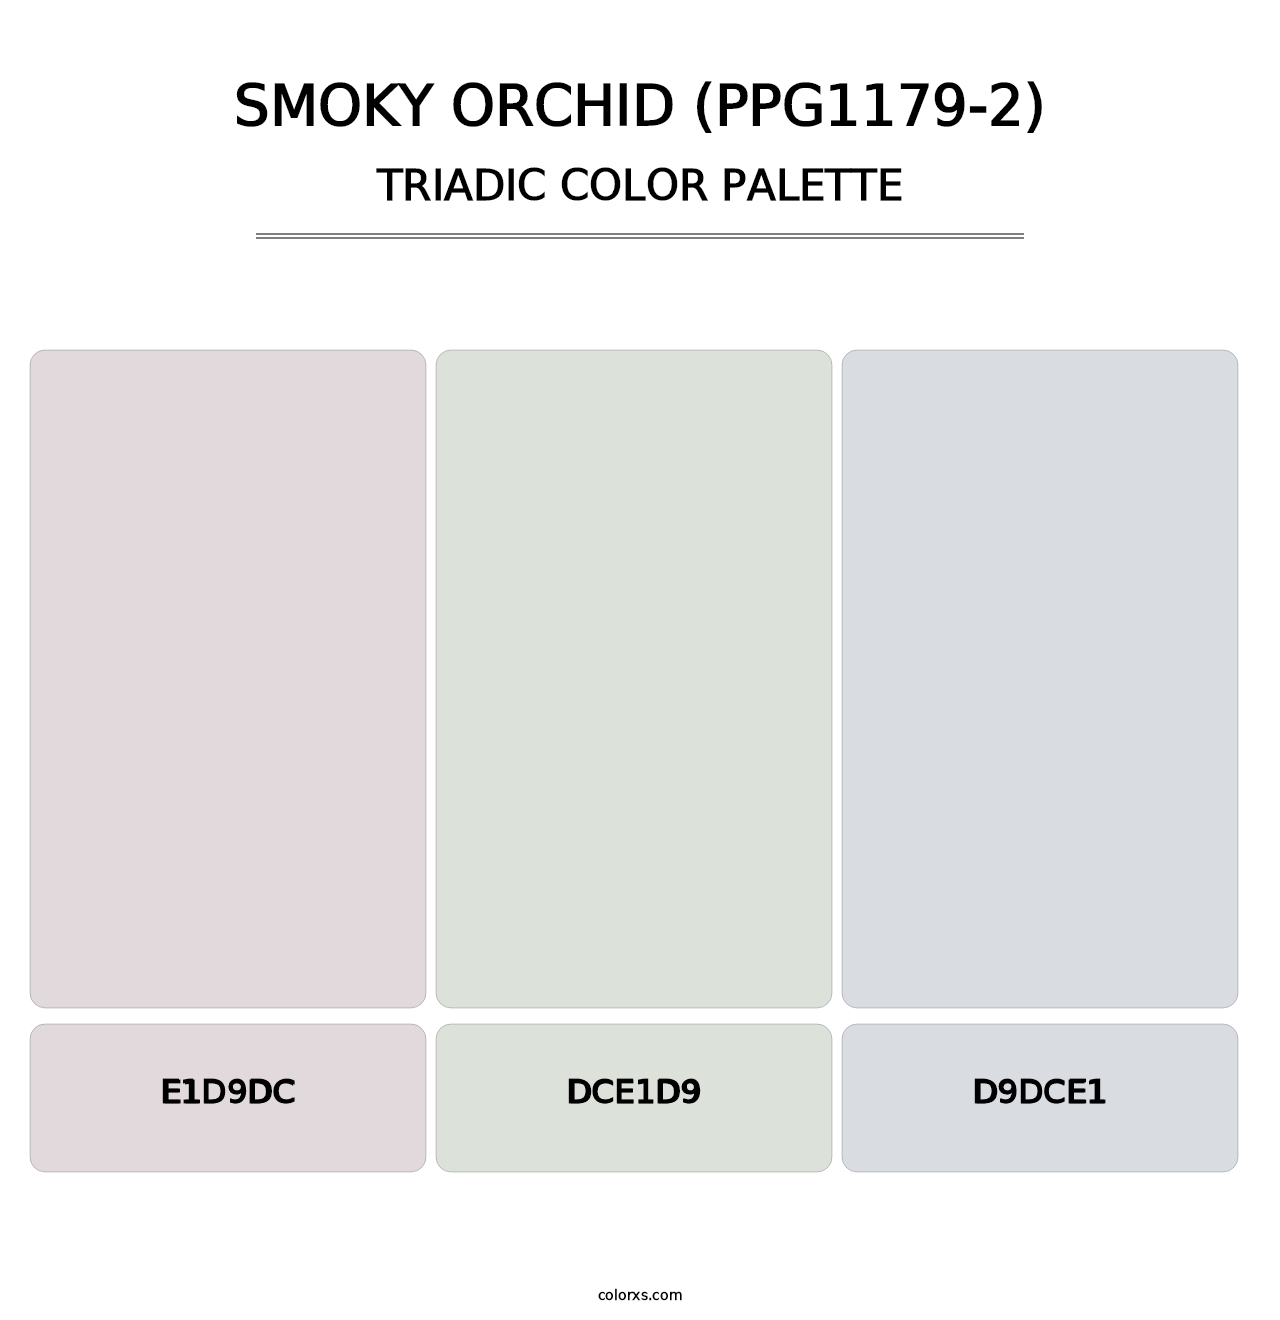 Smoky Orchid (PPG1179-2) - Triadic Color Palette